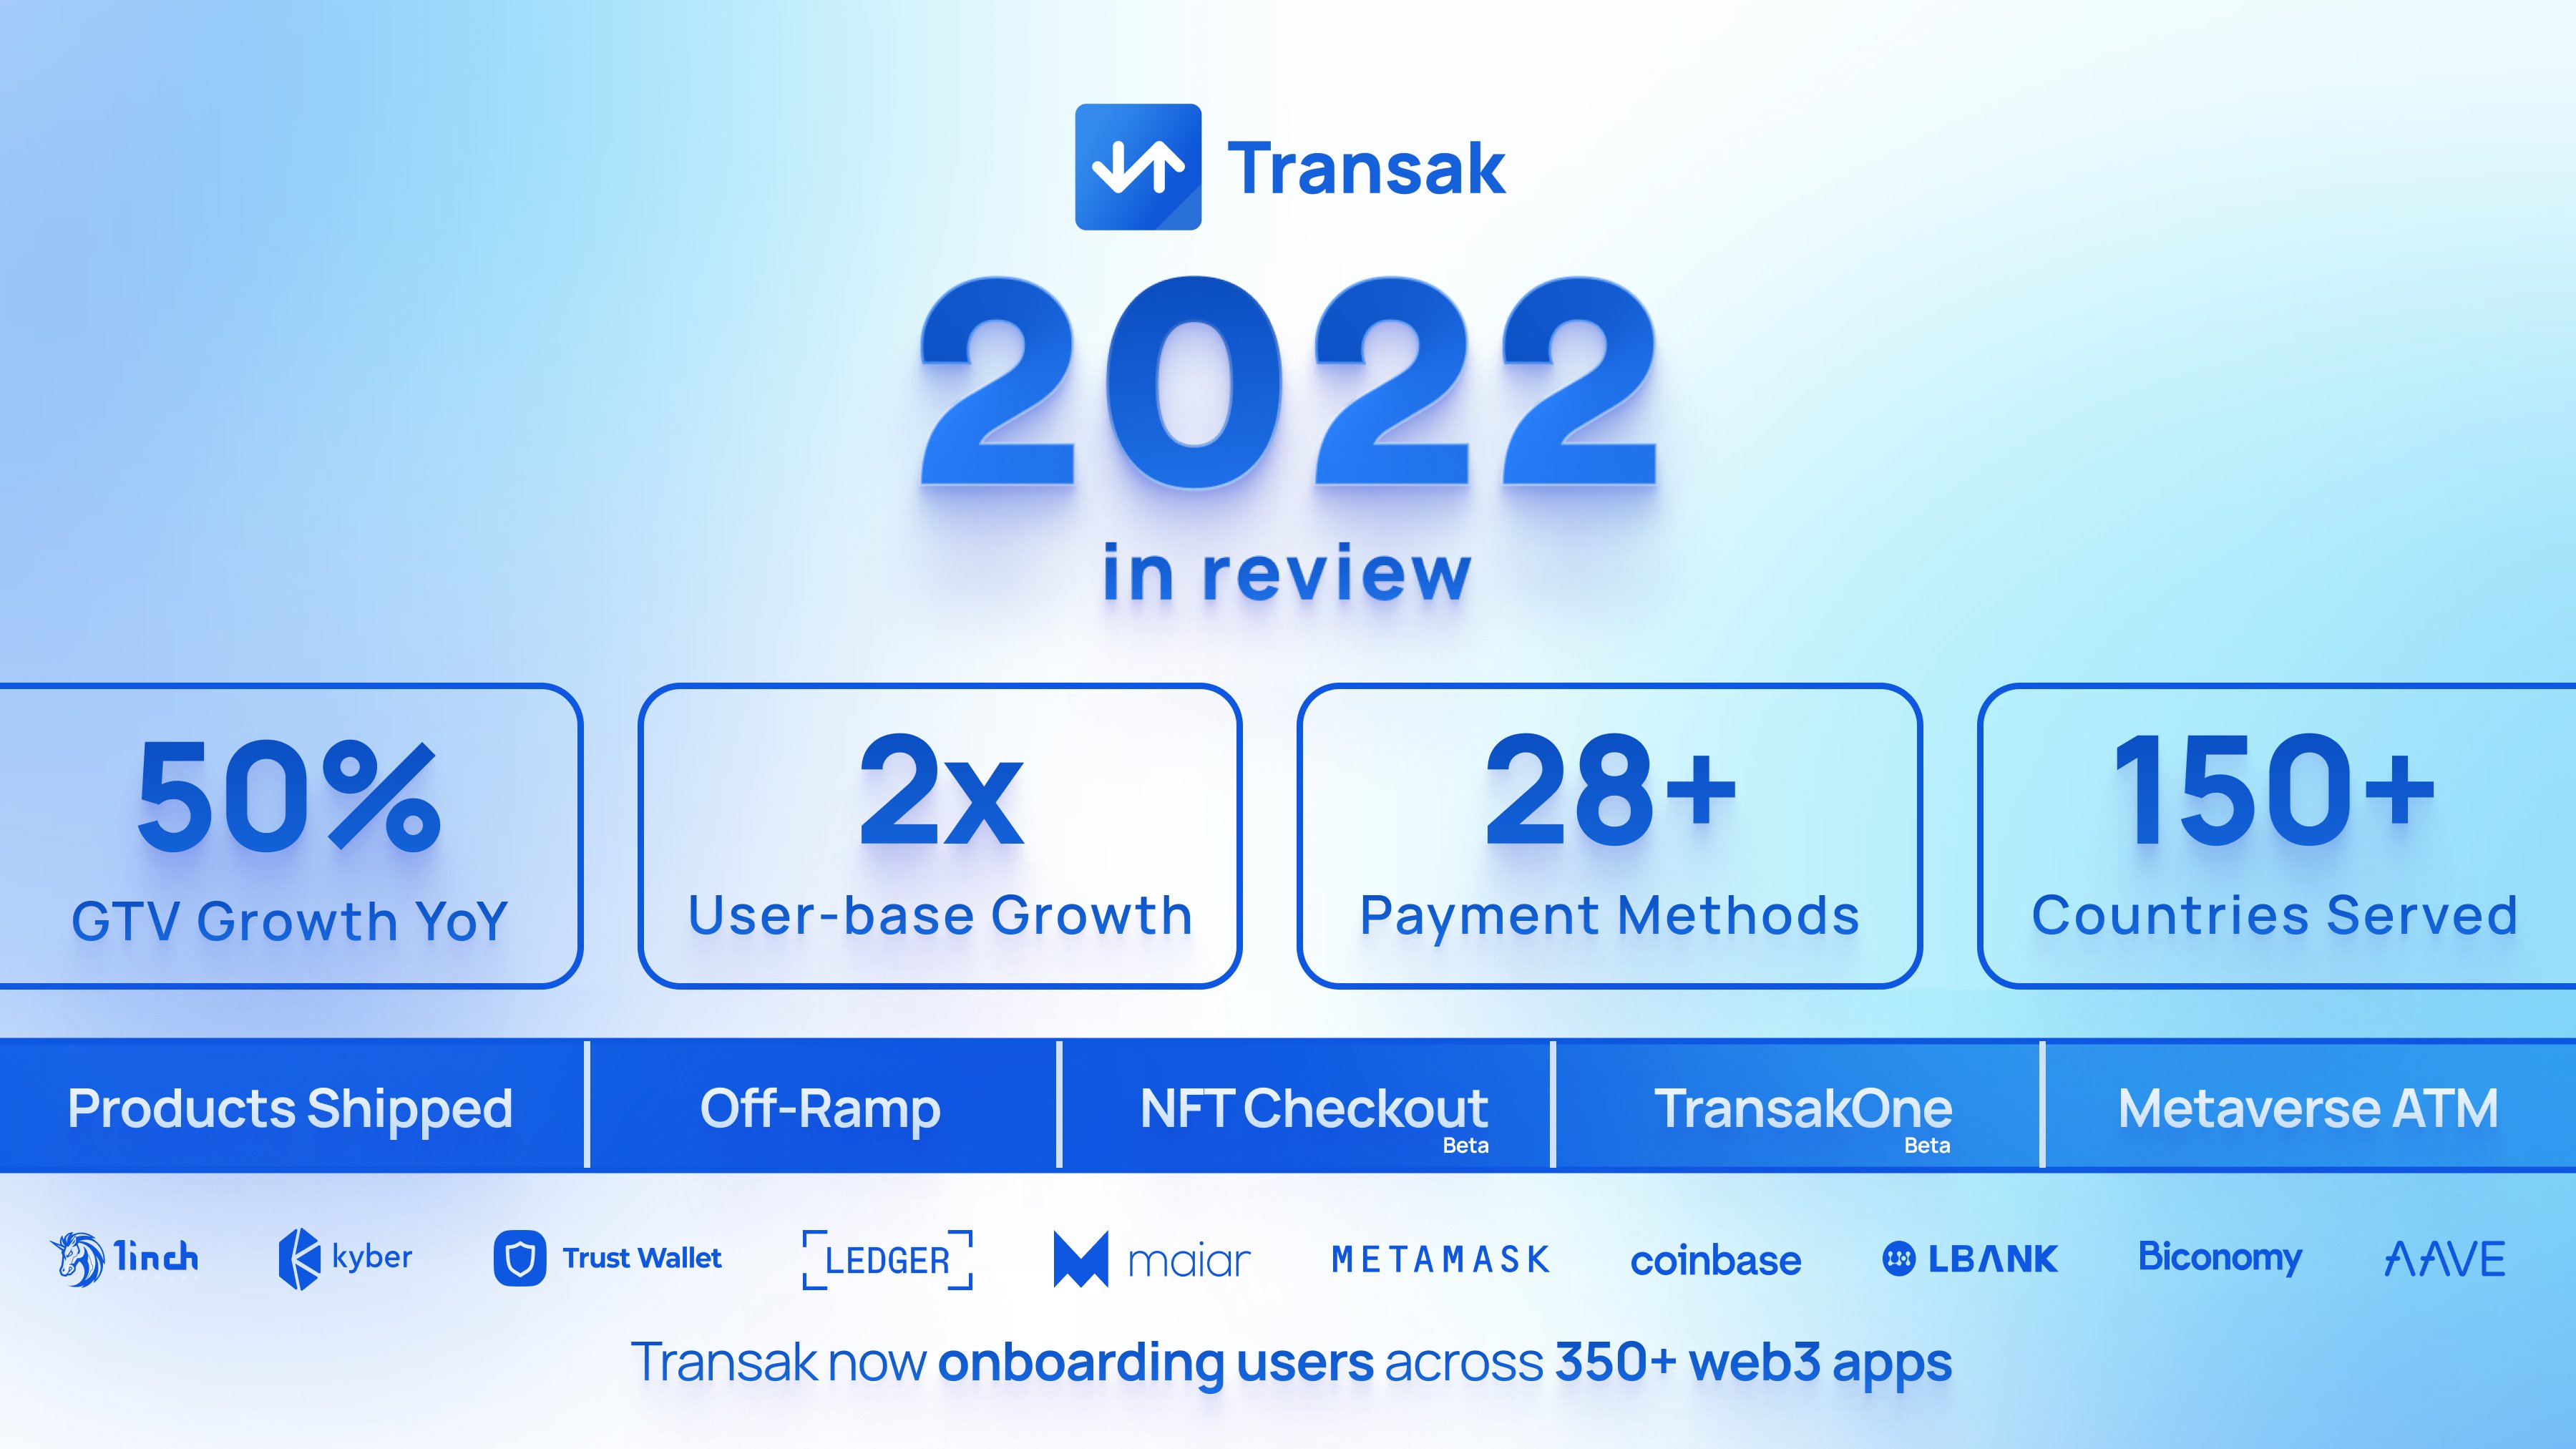 Transak's 2022 Year in Review